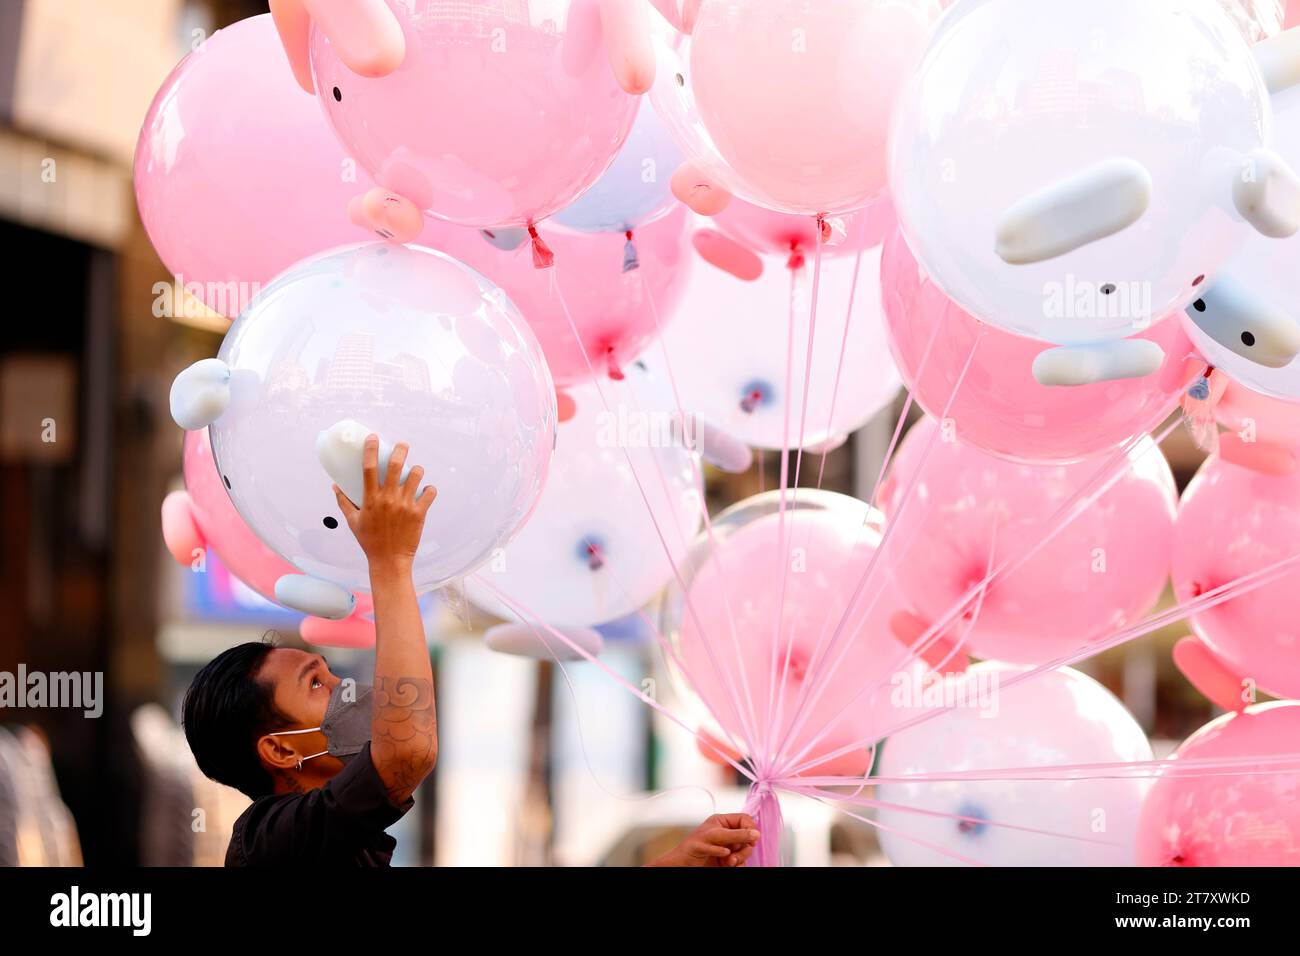 Man selling air pink balloon toys in street, Ho Chi Minh City, Vietnam, Indochina, Southeast Asia, Asia Stock Photo